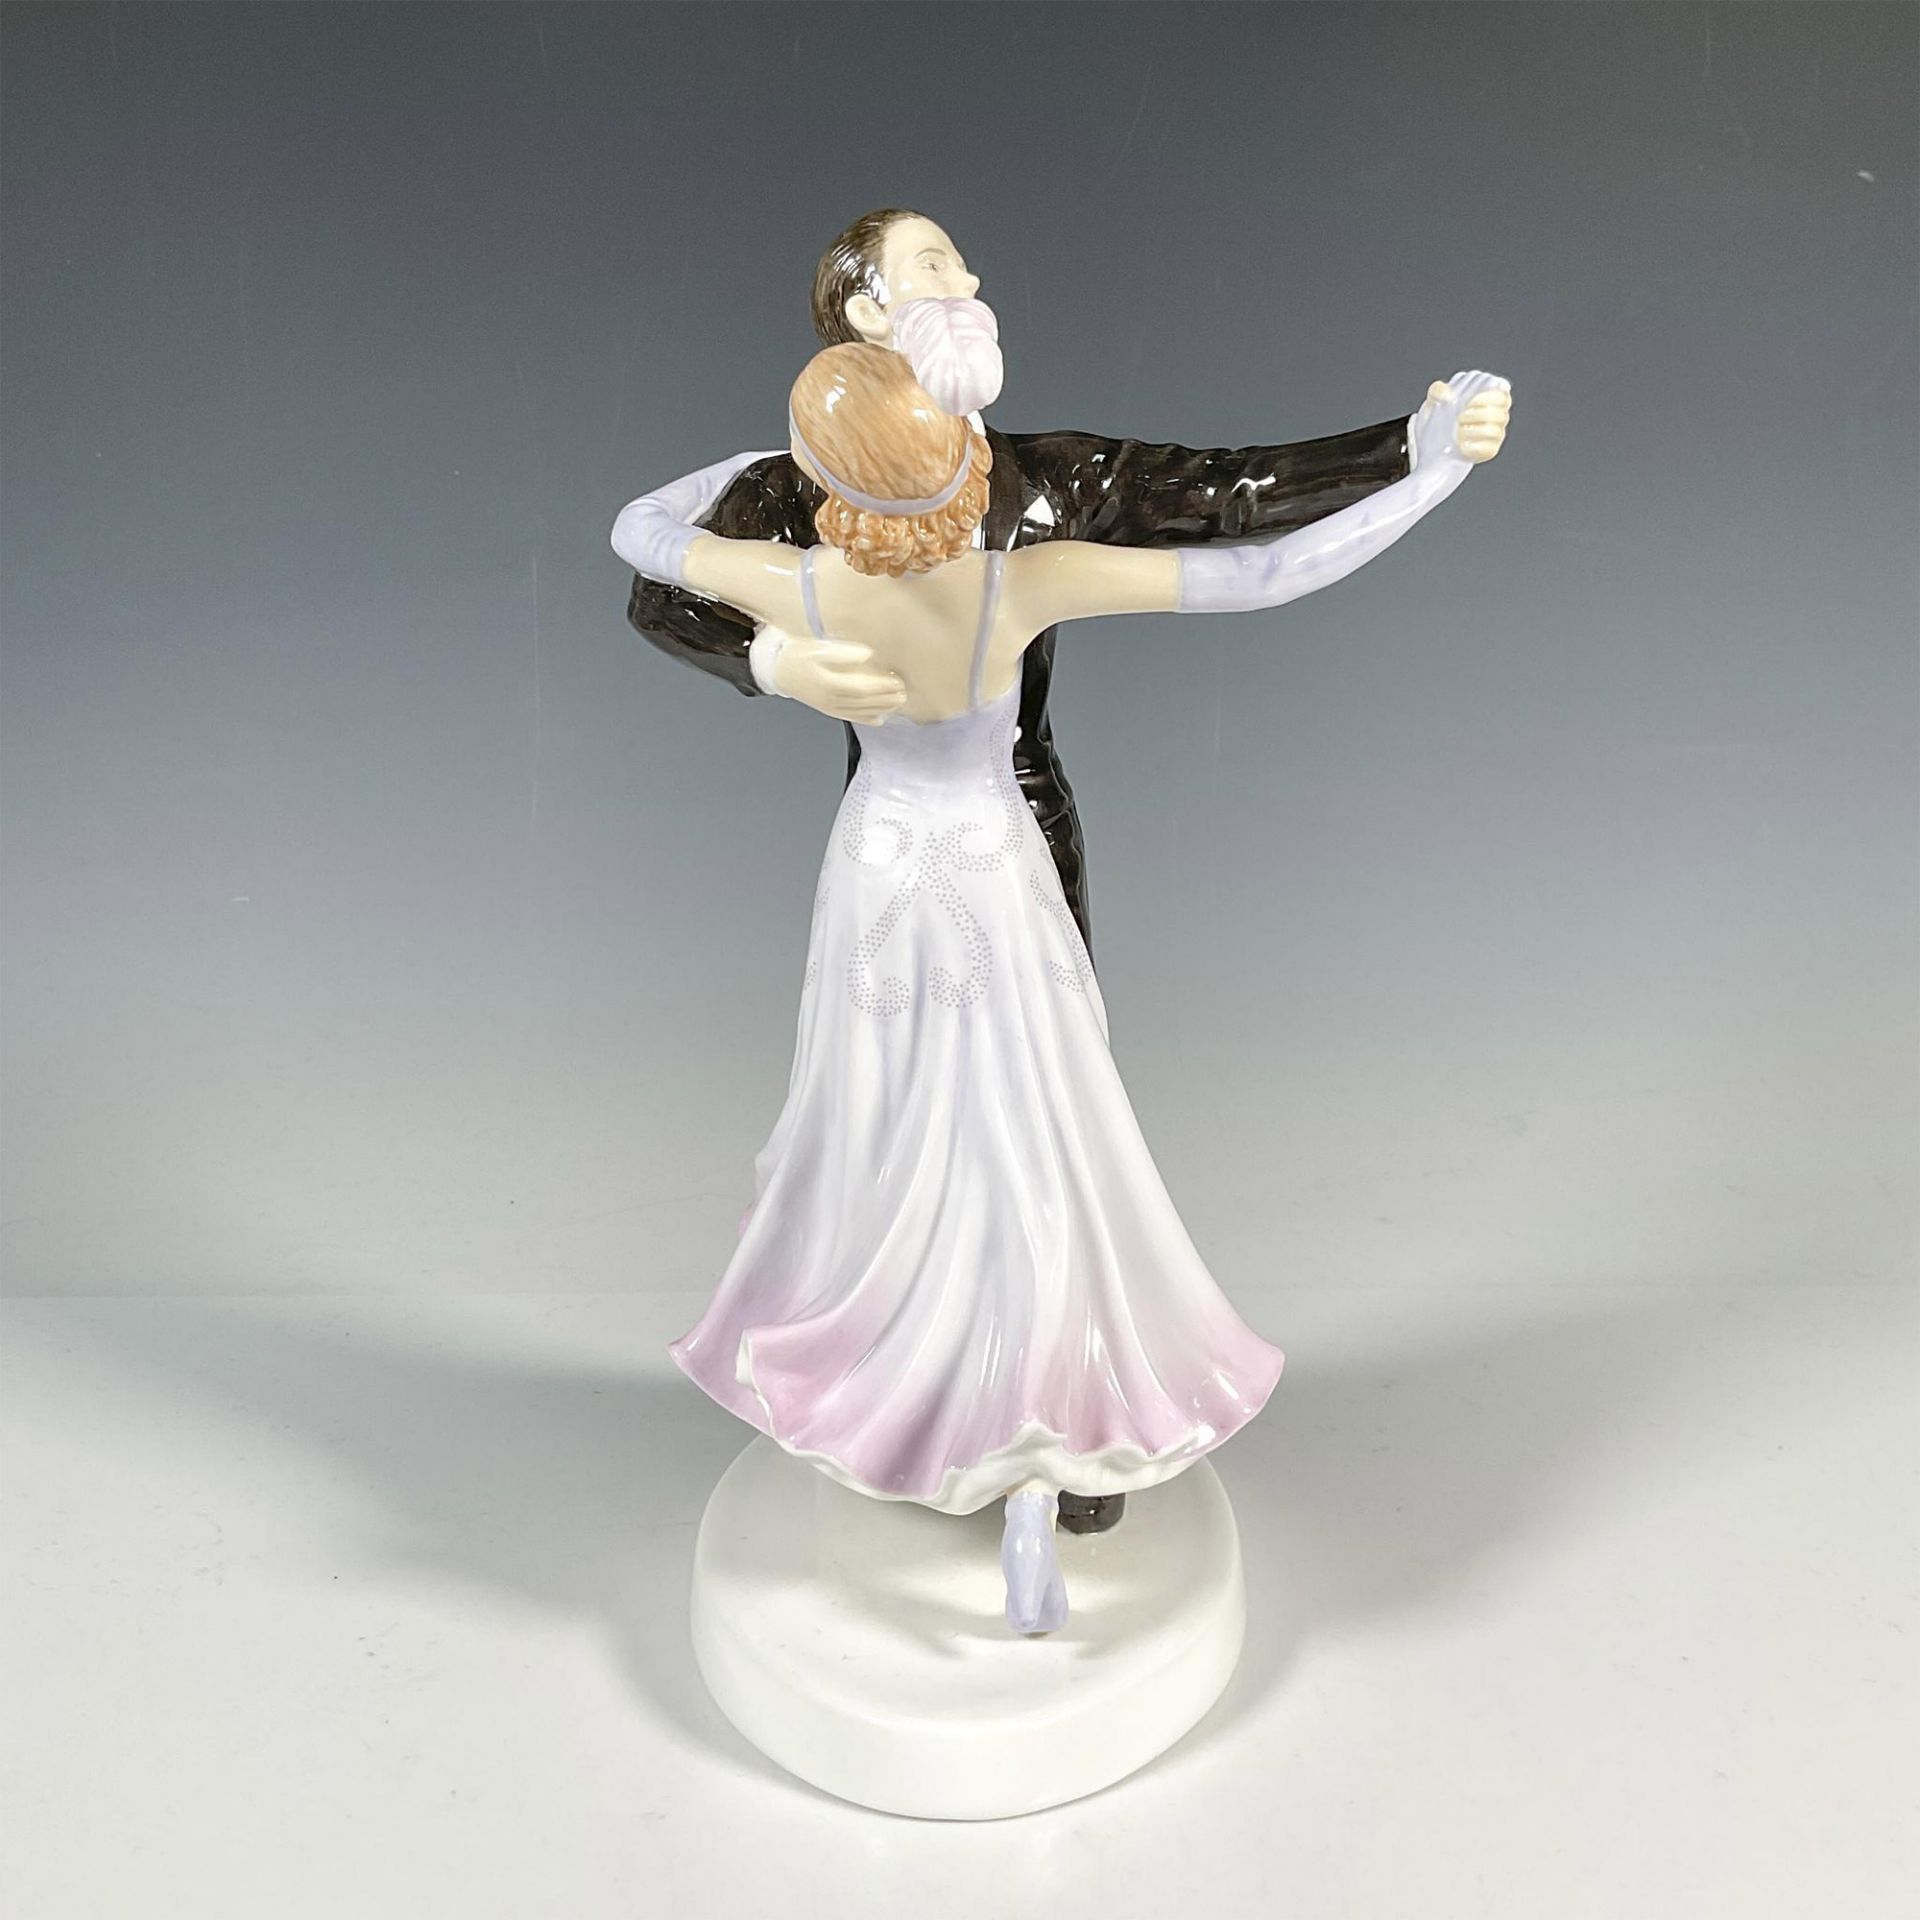 Fox Trot HN5445 - Royal Doulton Figurine Dance Collection - Image 4 of 5